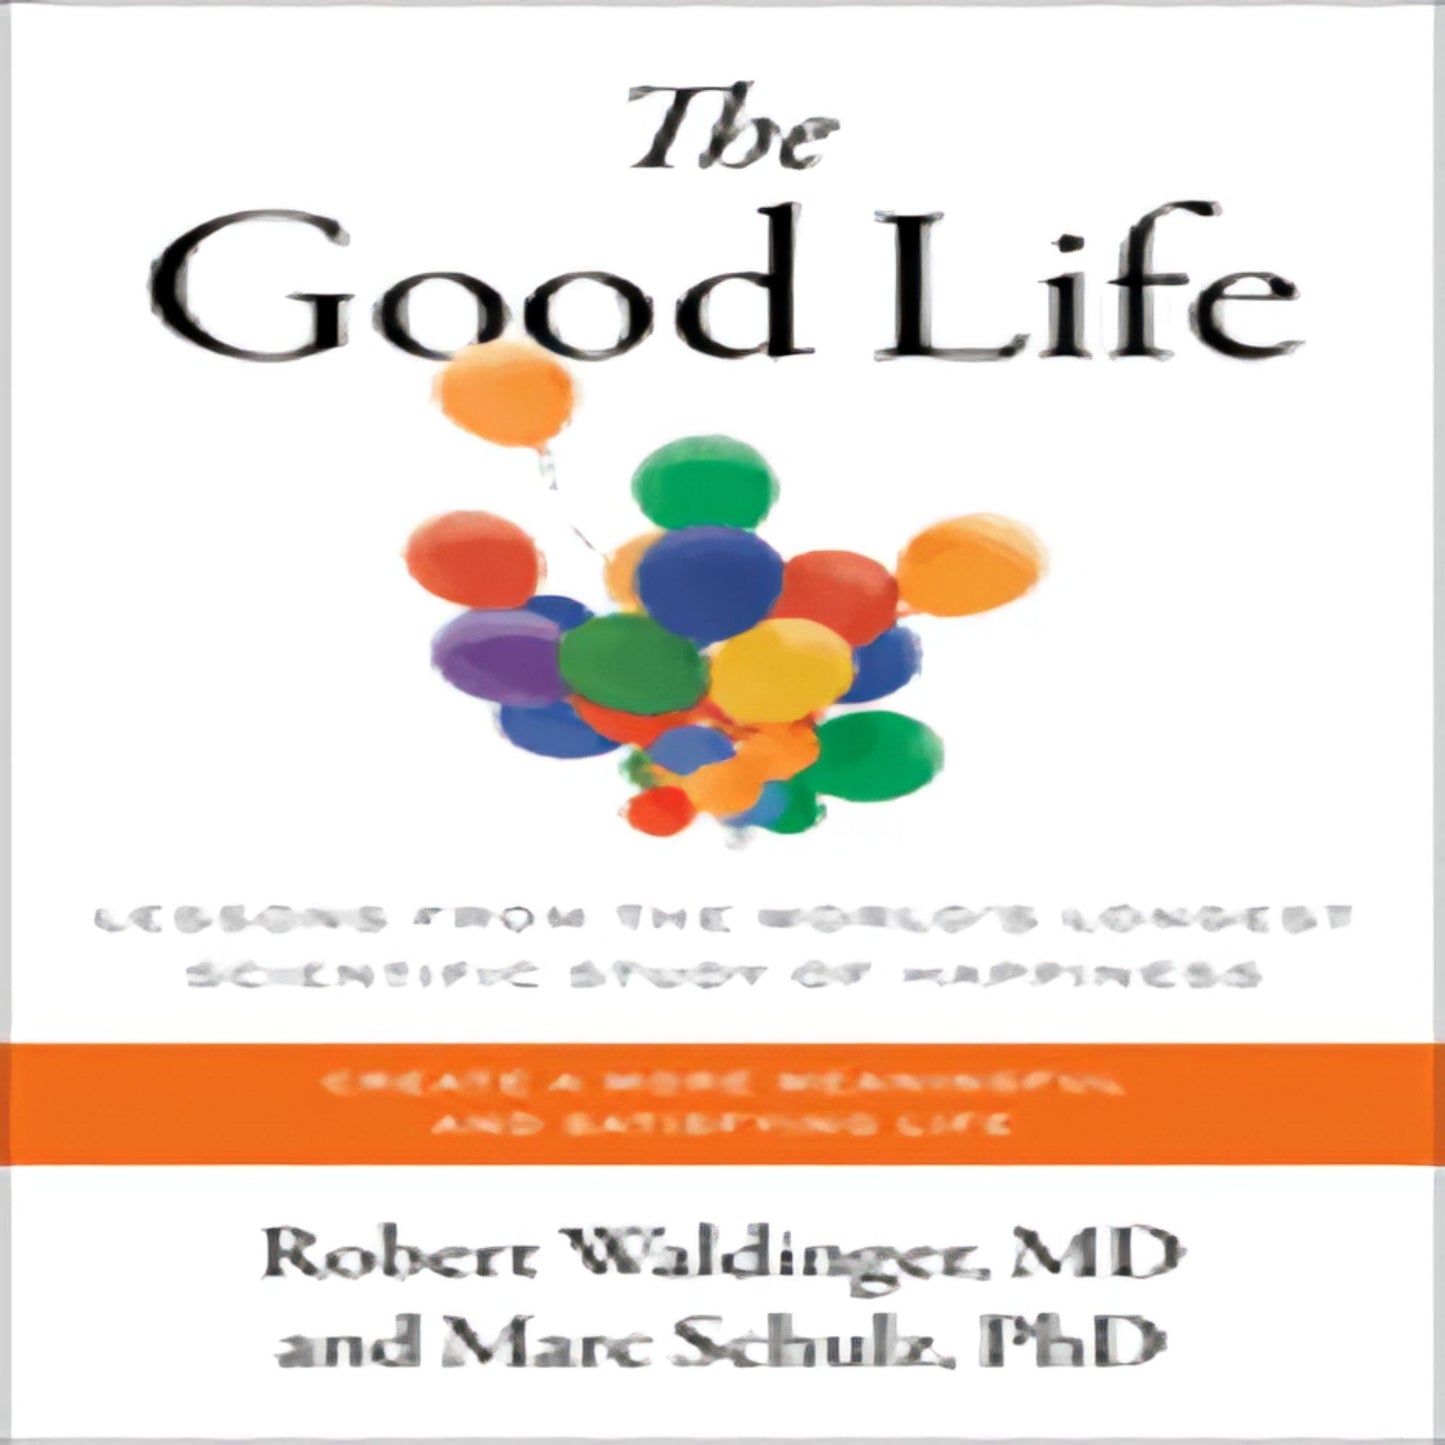 The Good Life: Lessons from the World's Longest Scientific Study of Happiness83-021923-198216669XDPGBOOKSTORE.COM. Today's Bestsellers.